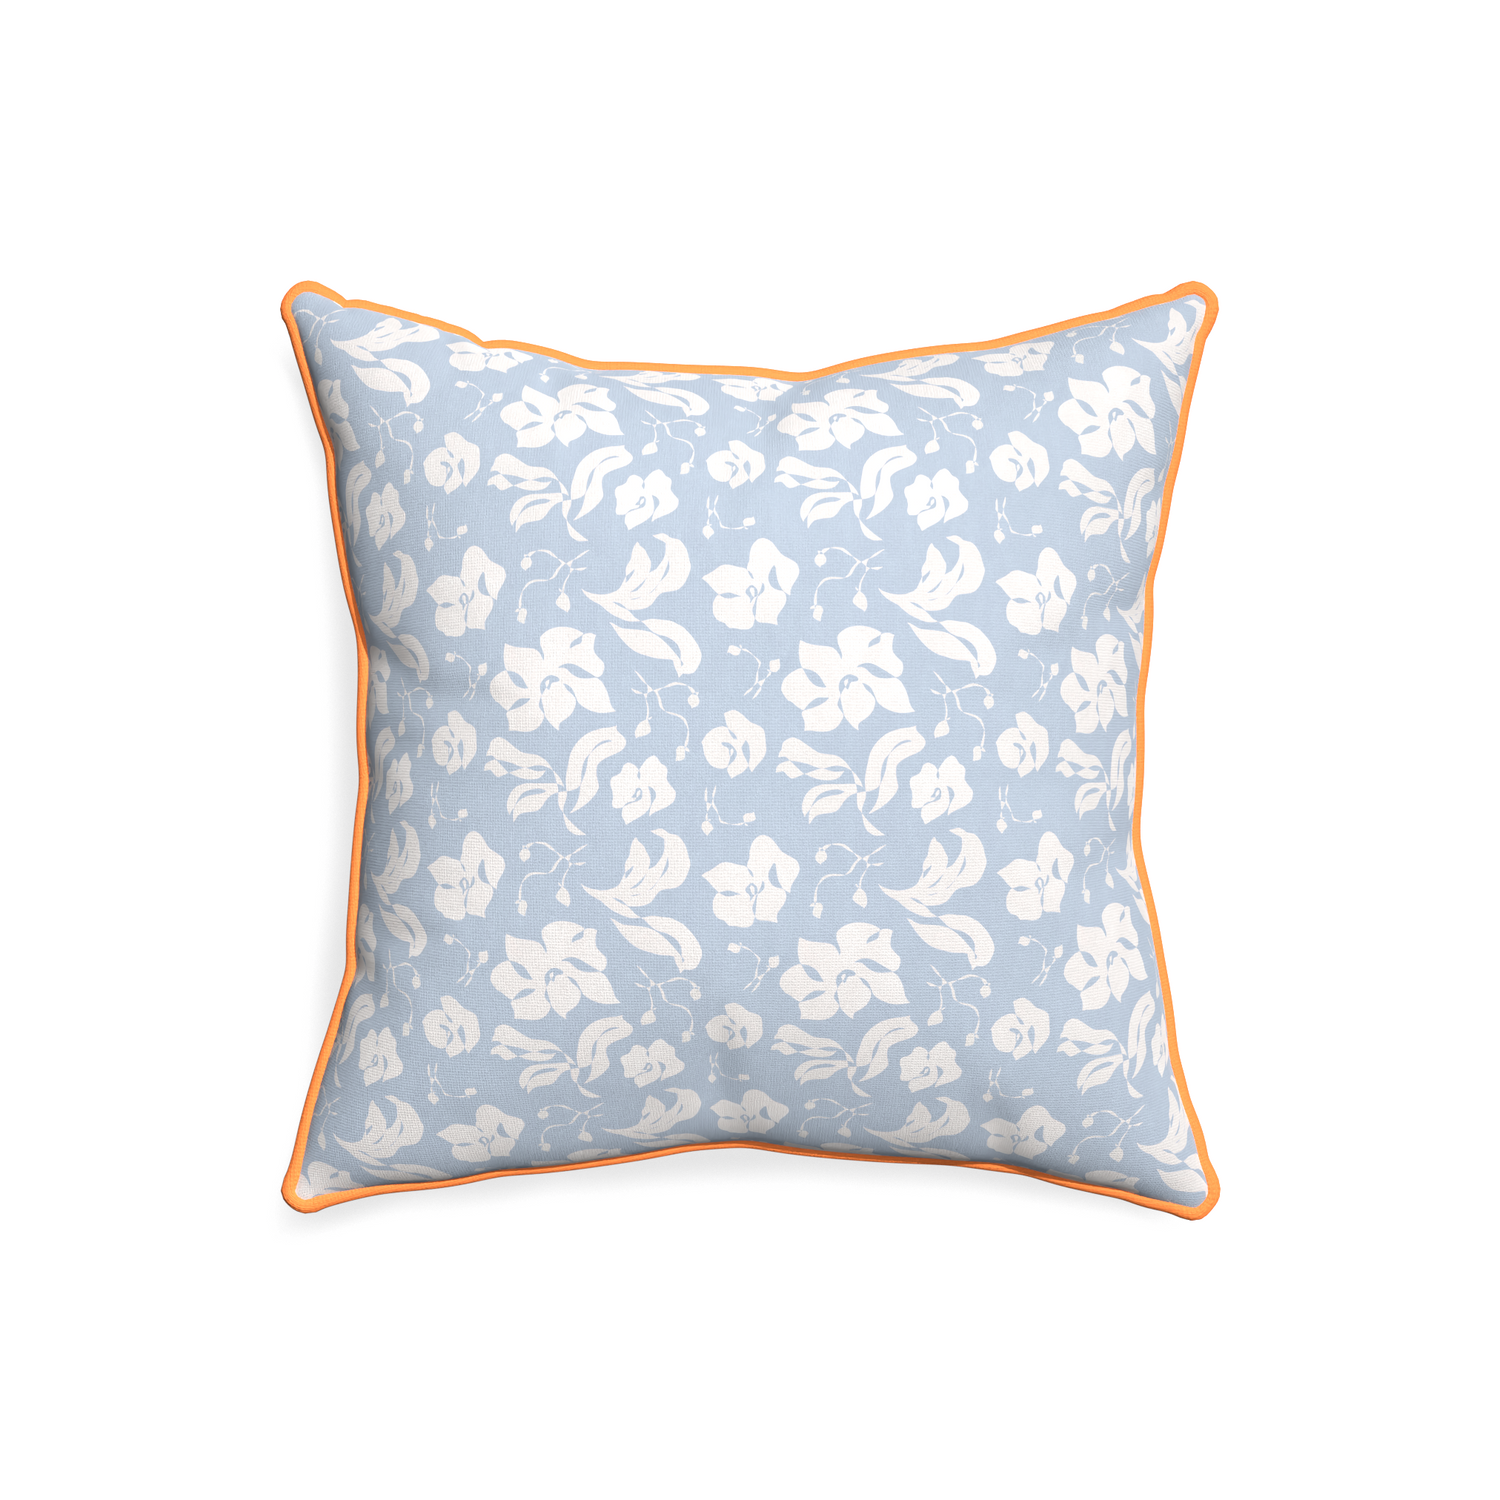 20-square georgia custom pillow with clementine piping on white background